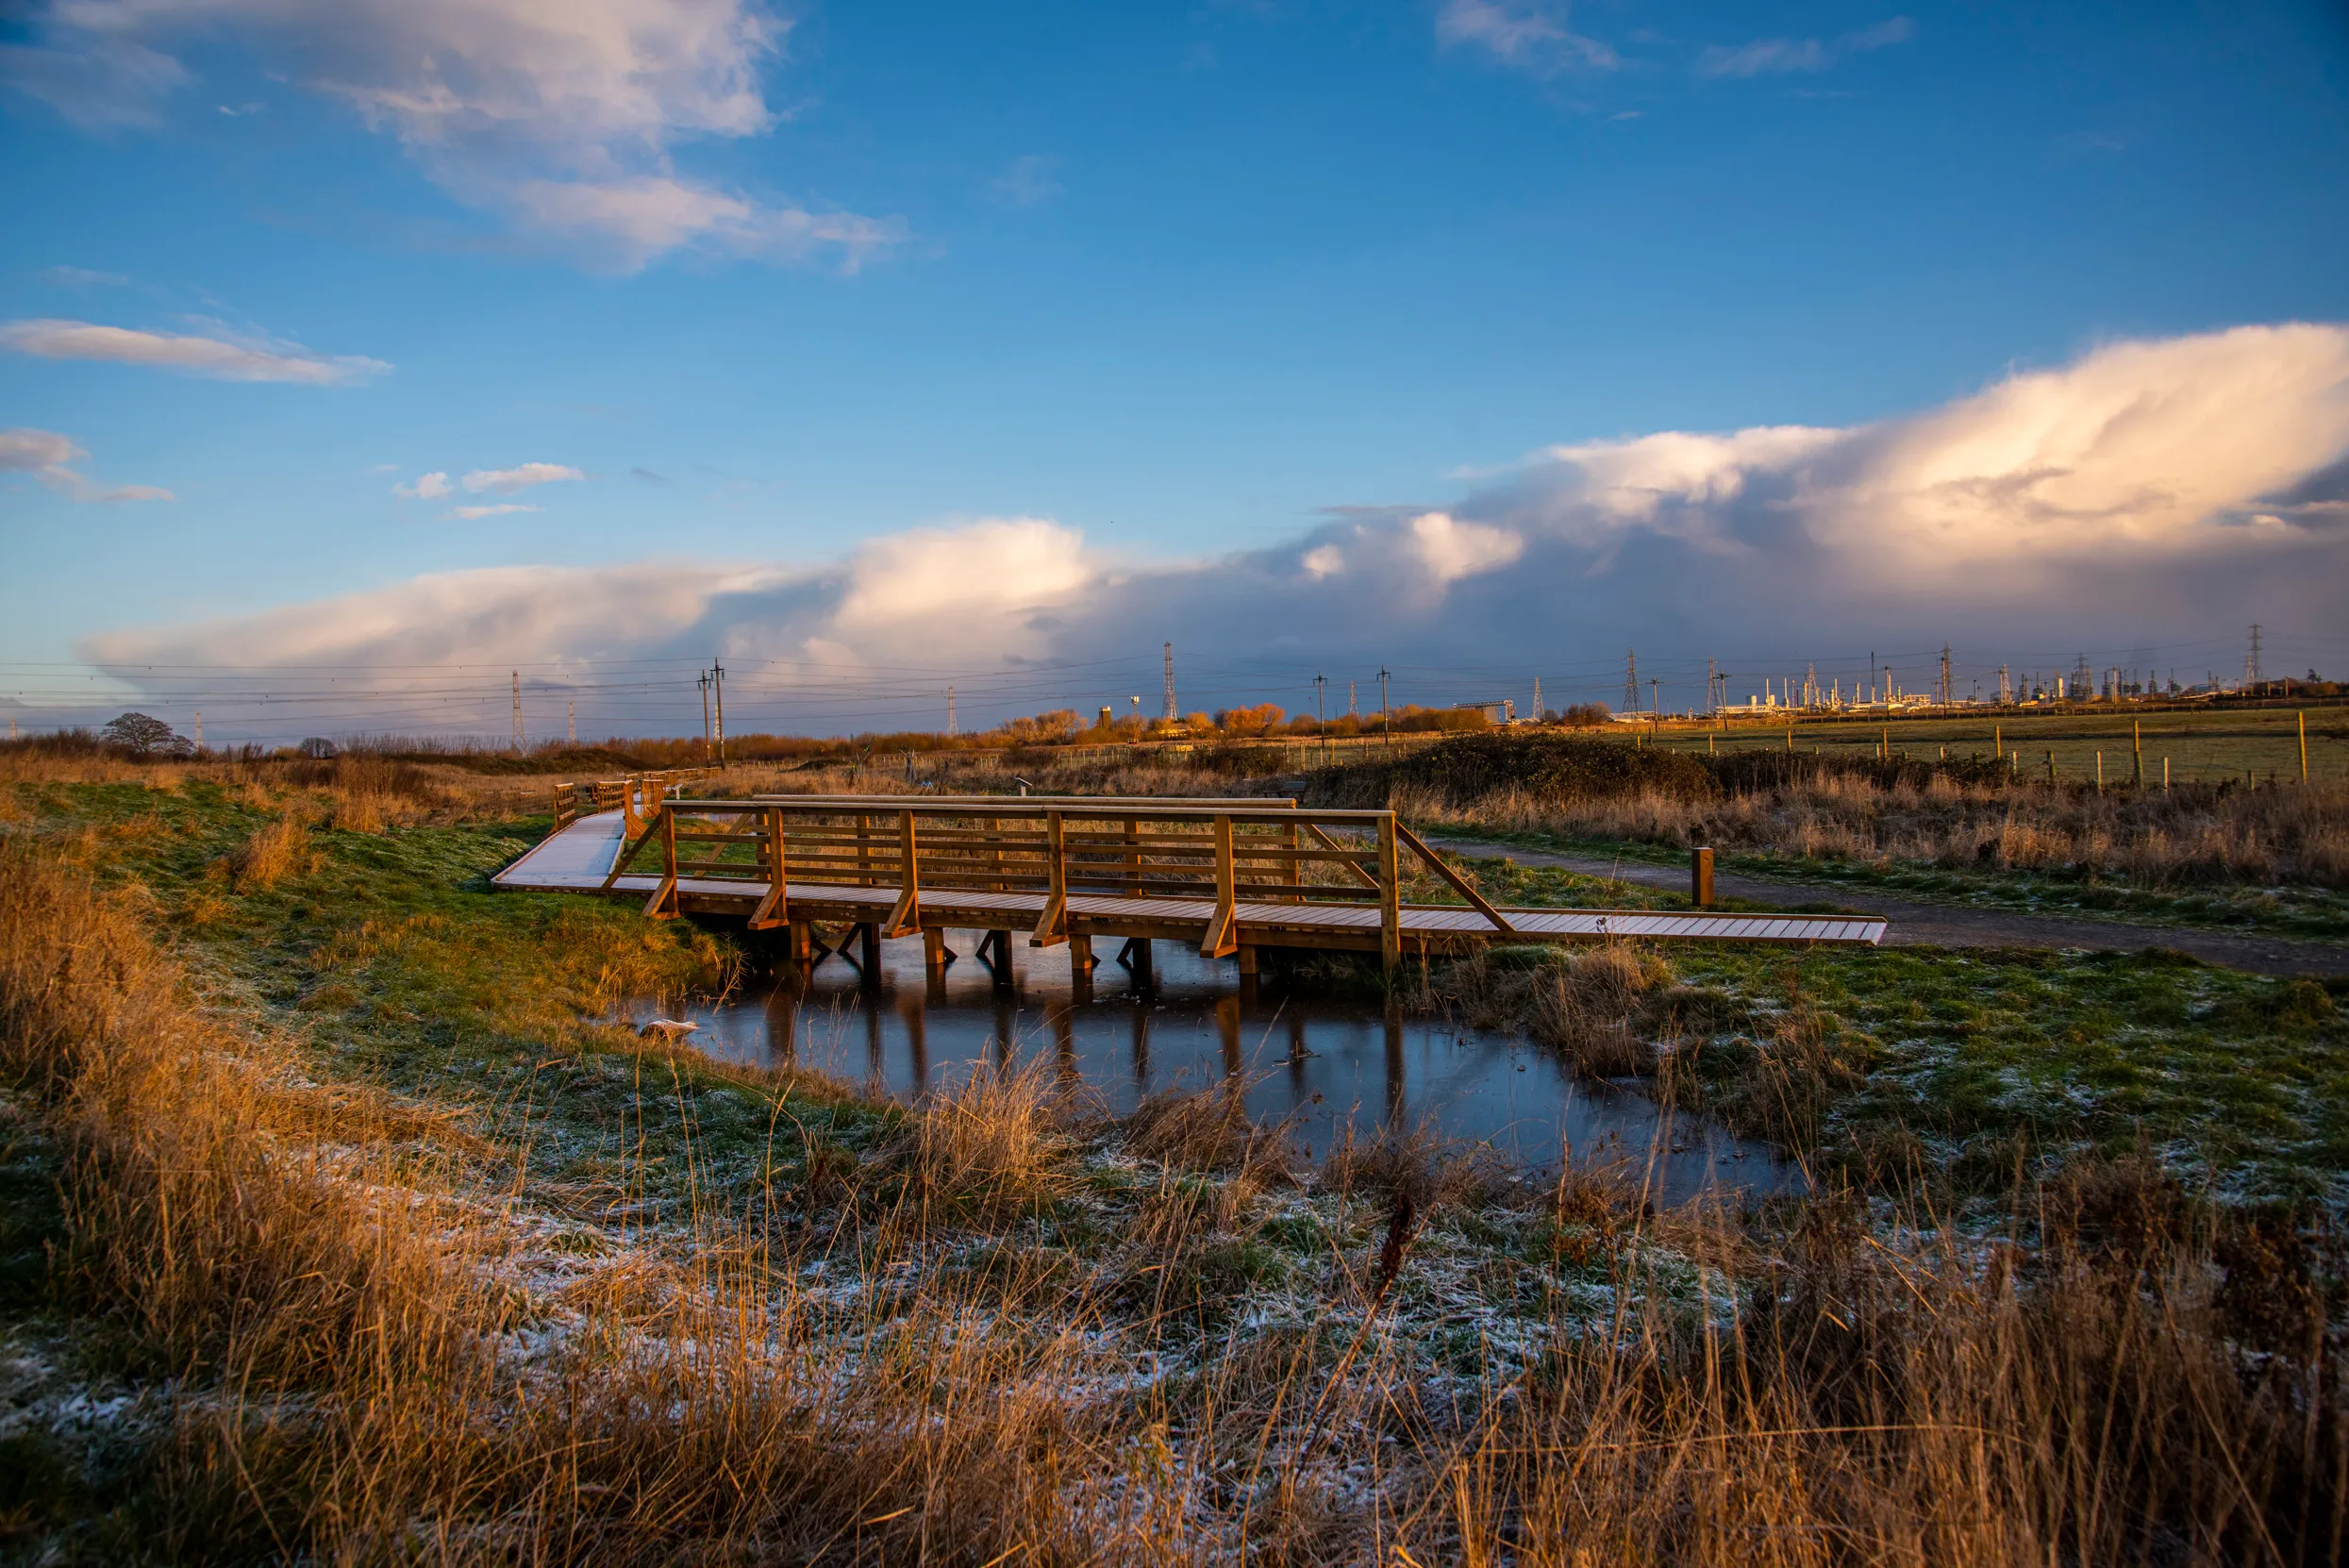 A view across the frosty Saltholme ponds in winter